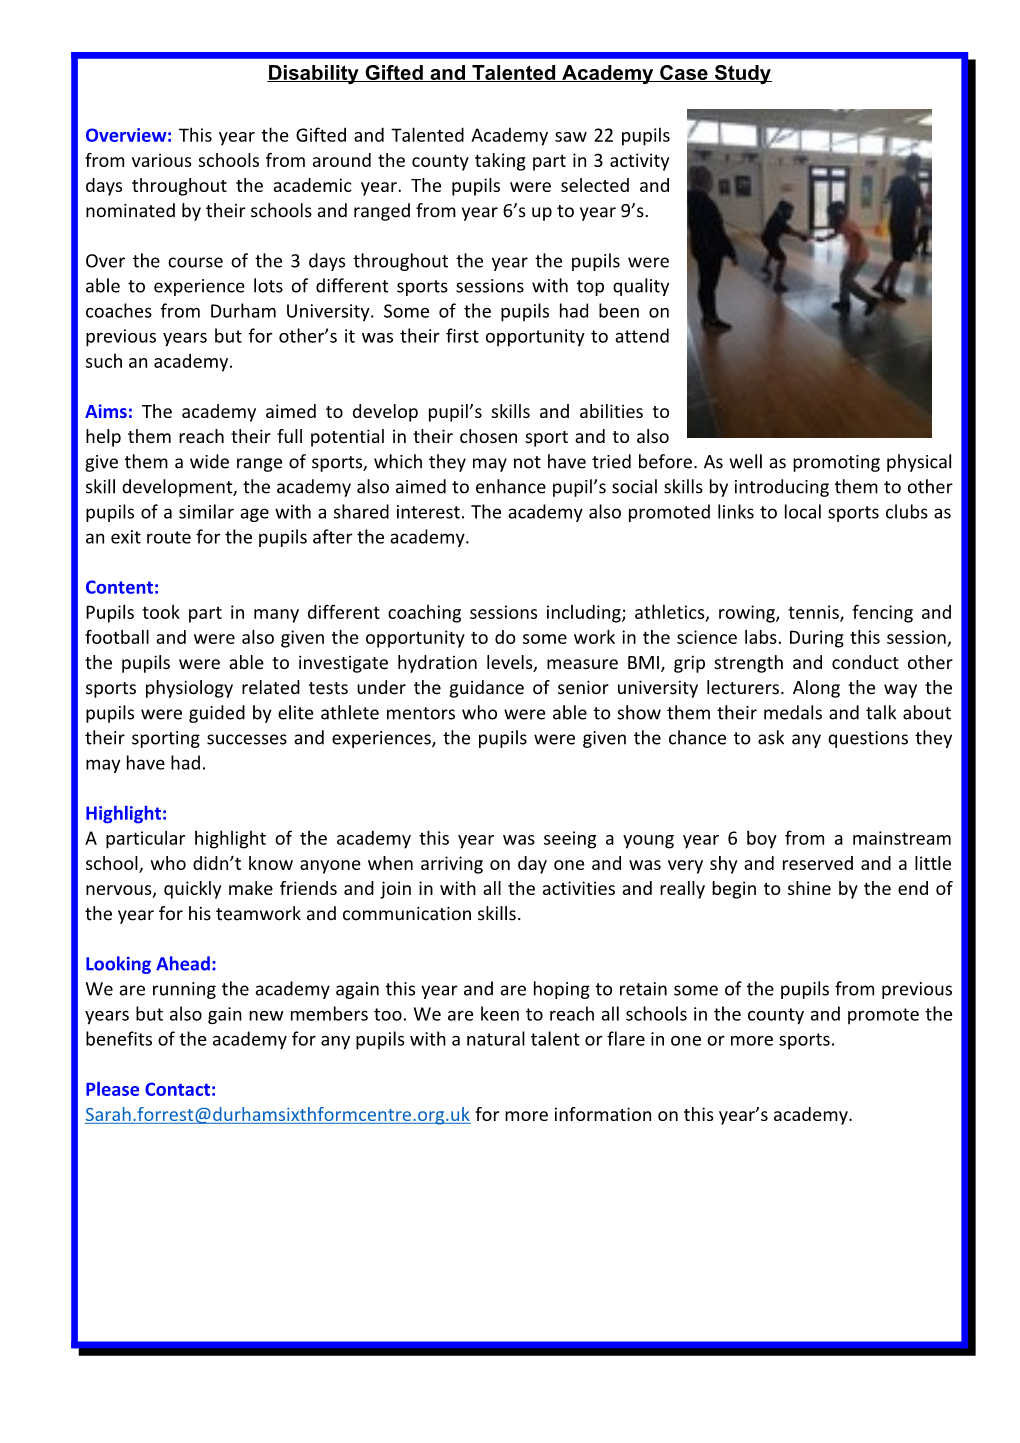 Disability Gifted and Talented Academy Case Study